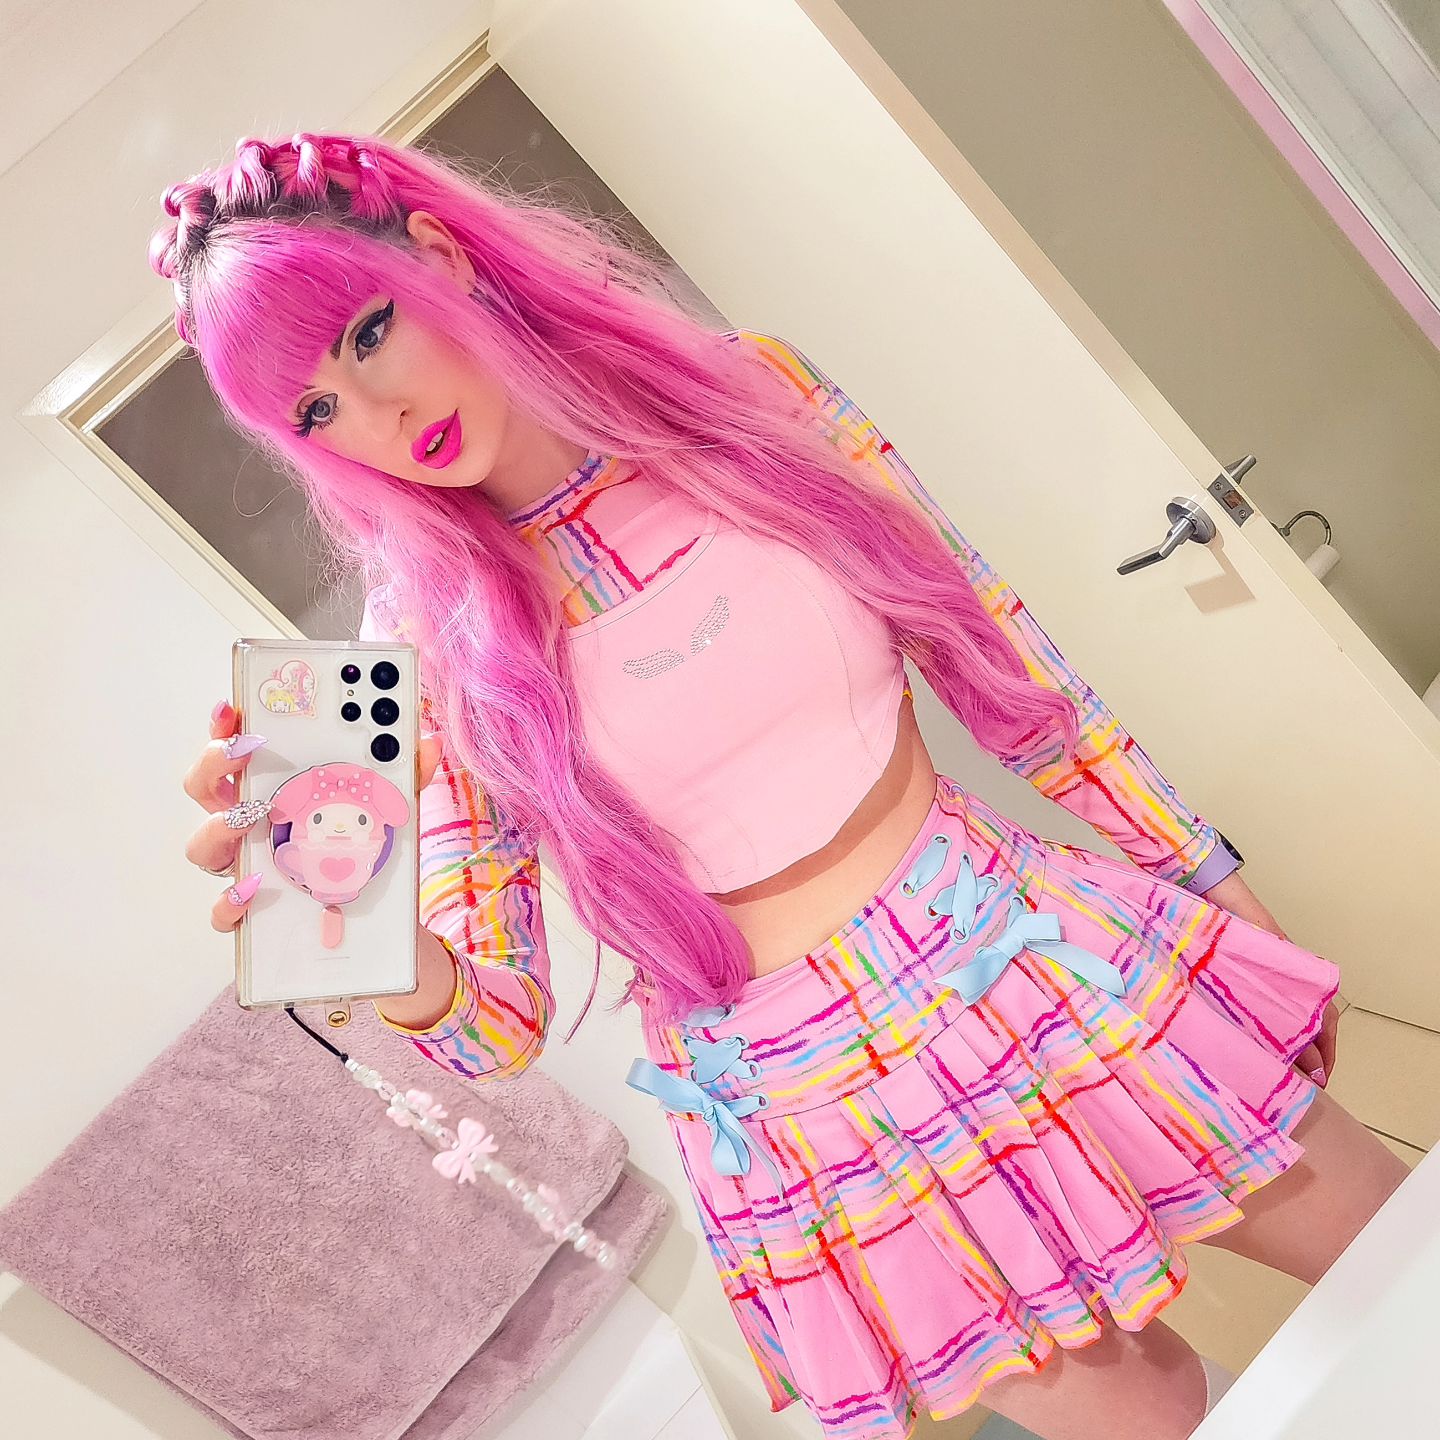 ♡But how much pink is really too much?♡

I am so behind on content! I've been so busy preparing for @dreamhackau and working♥︎
Its all coming together and I am so damn excited! 

Here's a little 90s themed outfit I put together for @jasminfoxe 30th birthday which was a blast!
Group pics to come!🩷

#dangerfield #egirl #altfashion #altgirl #pink #pinkhair #pinkaesthetic